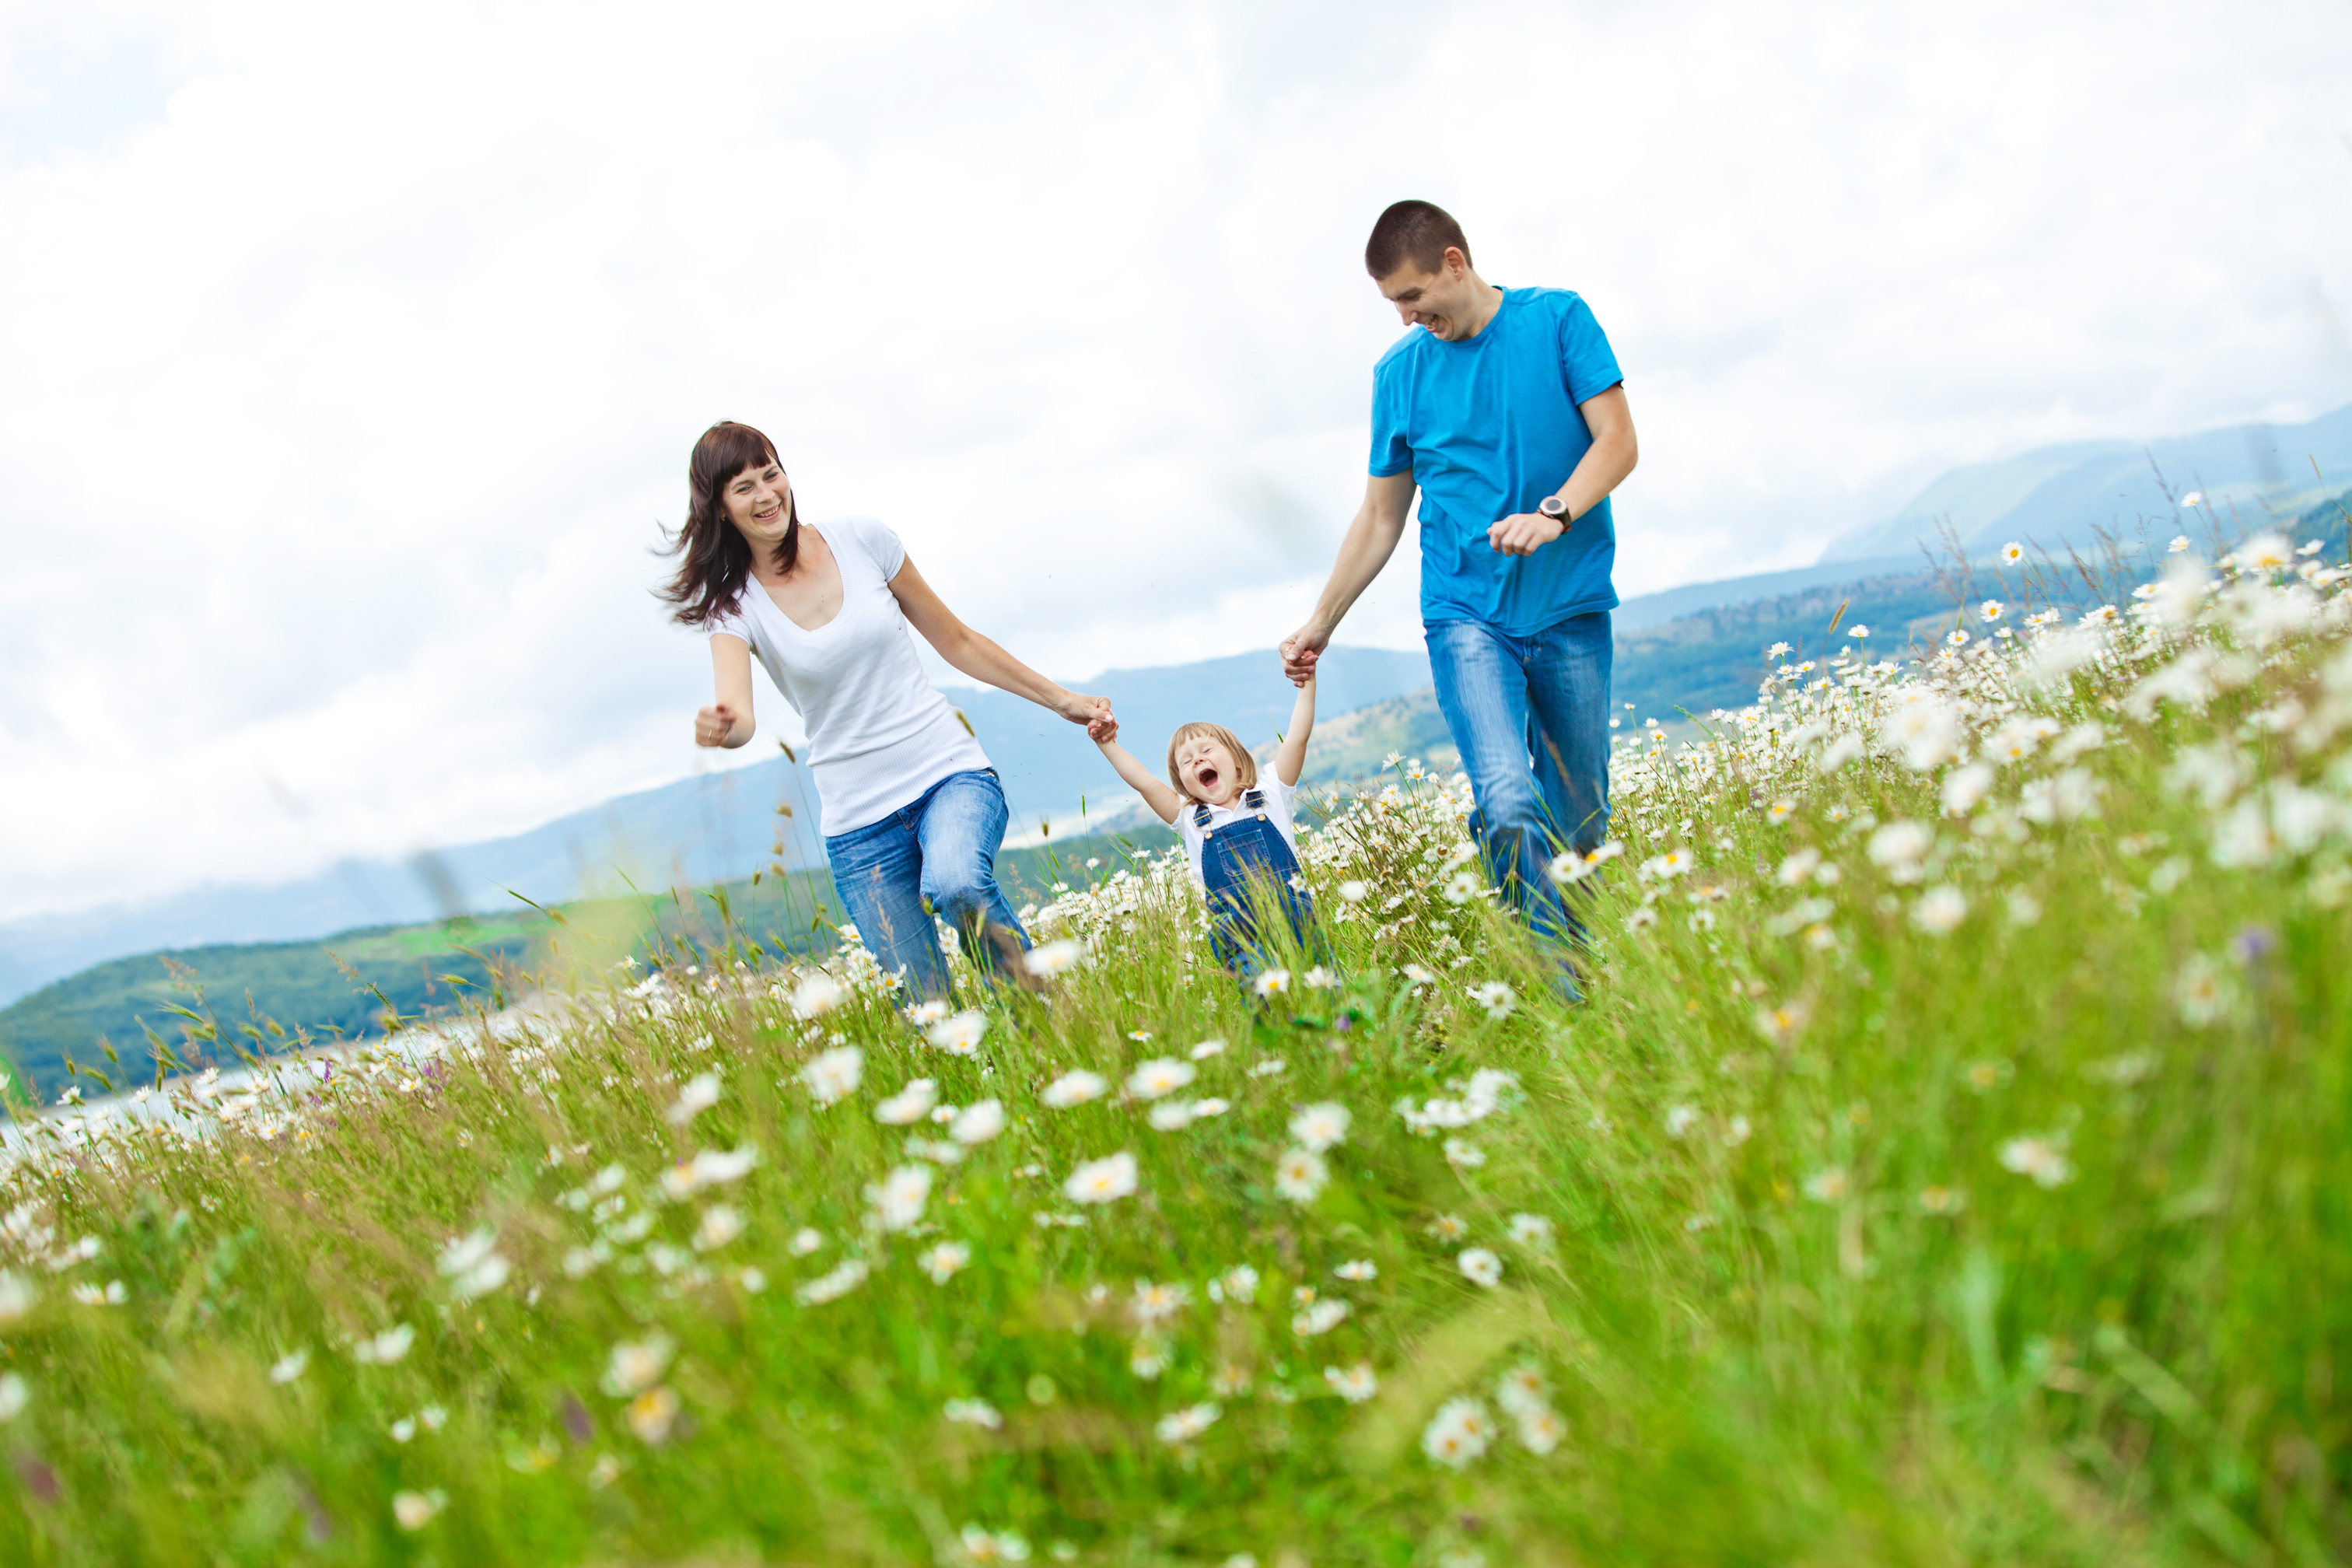 How can I protect my family with life insurance?